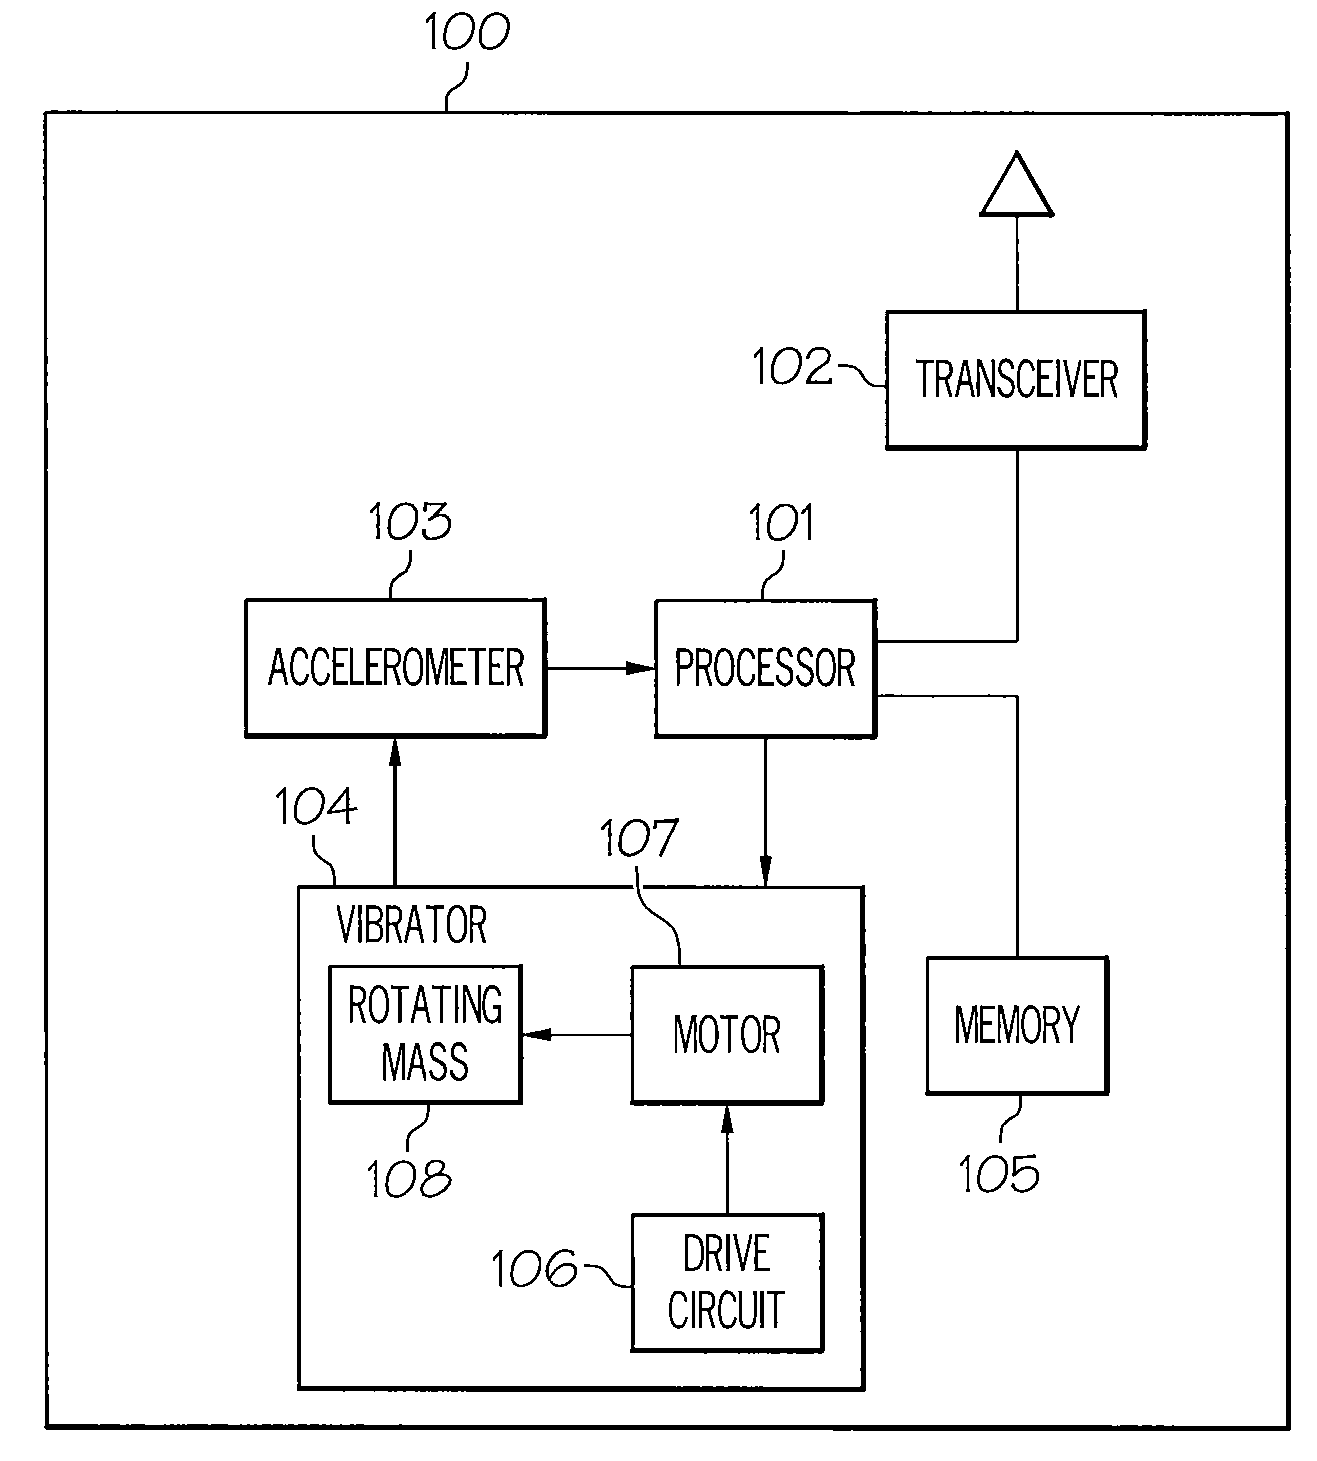 Use of an accelerometer to control vibrator performance